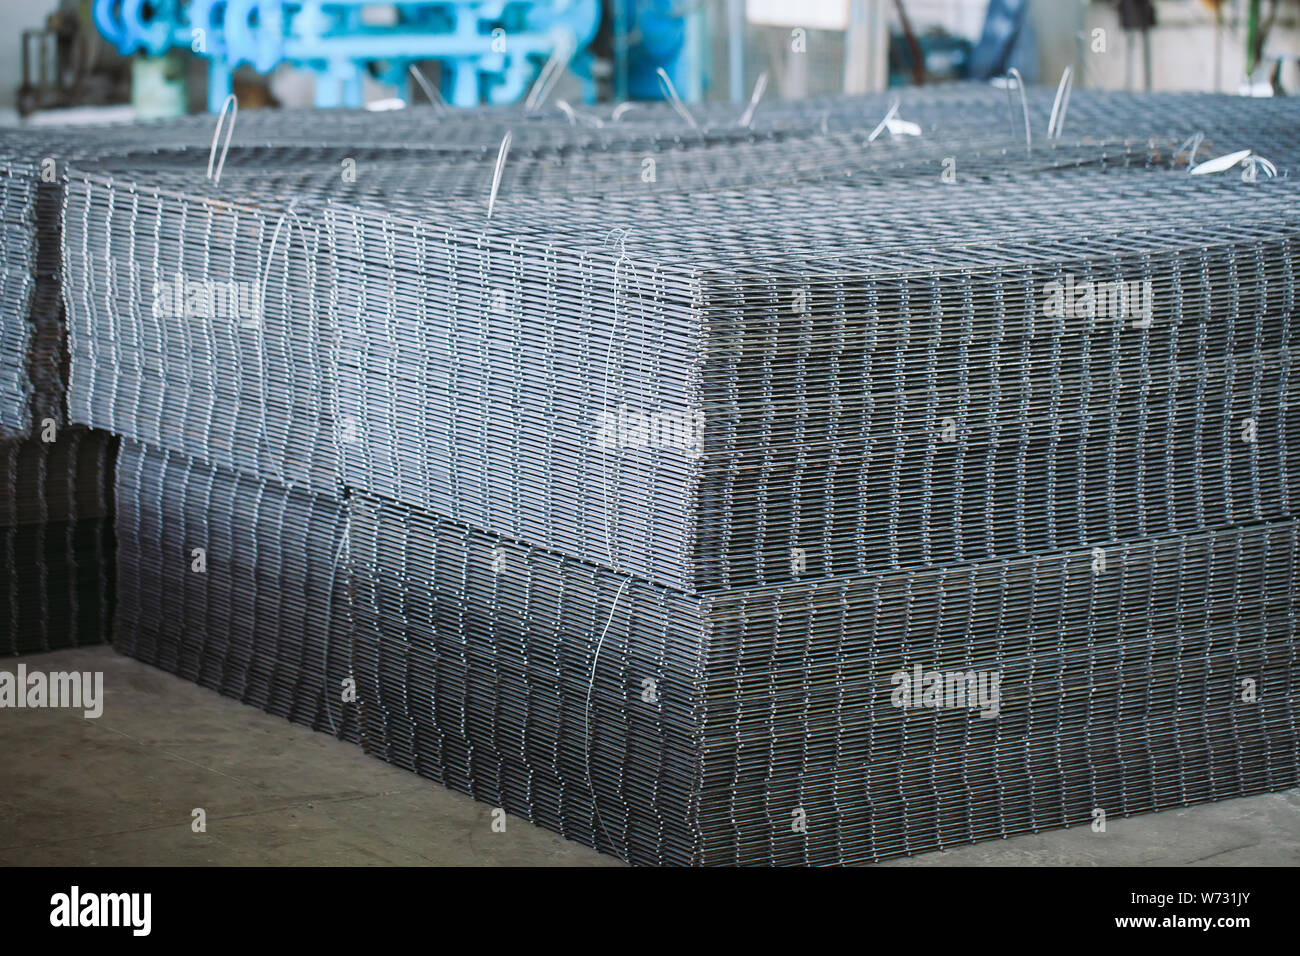 Metal grid. Heavy industry production. Metal rolling plant. Stock Photo